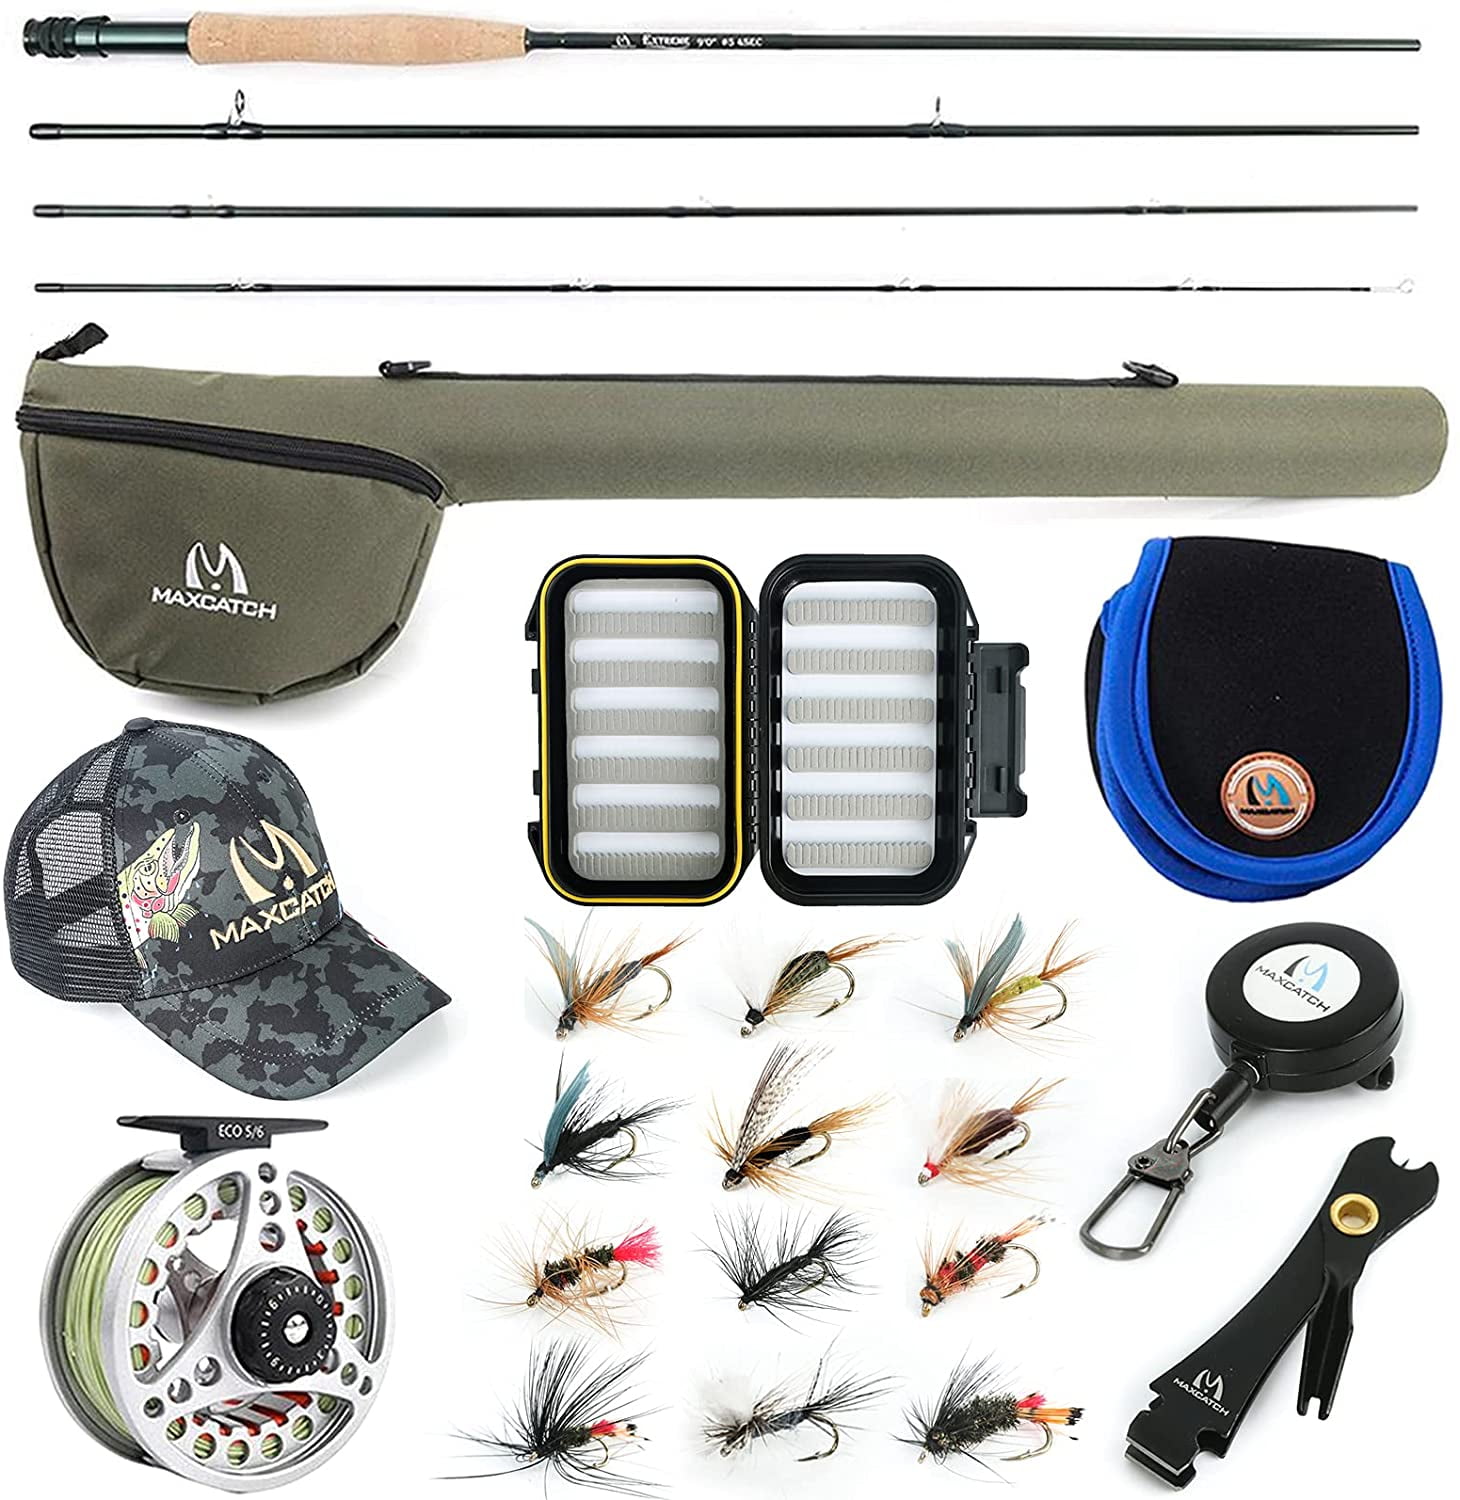 M MAXIMUMCATCH Maxcatch Extreme Fly Fishing Combo Kit 3/ Weight, Starter  Fly Rod and Reel Outfit, with a Protective Travel Case 5wt 9 0 4pc Rod,5/6  Reel 